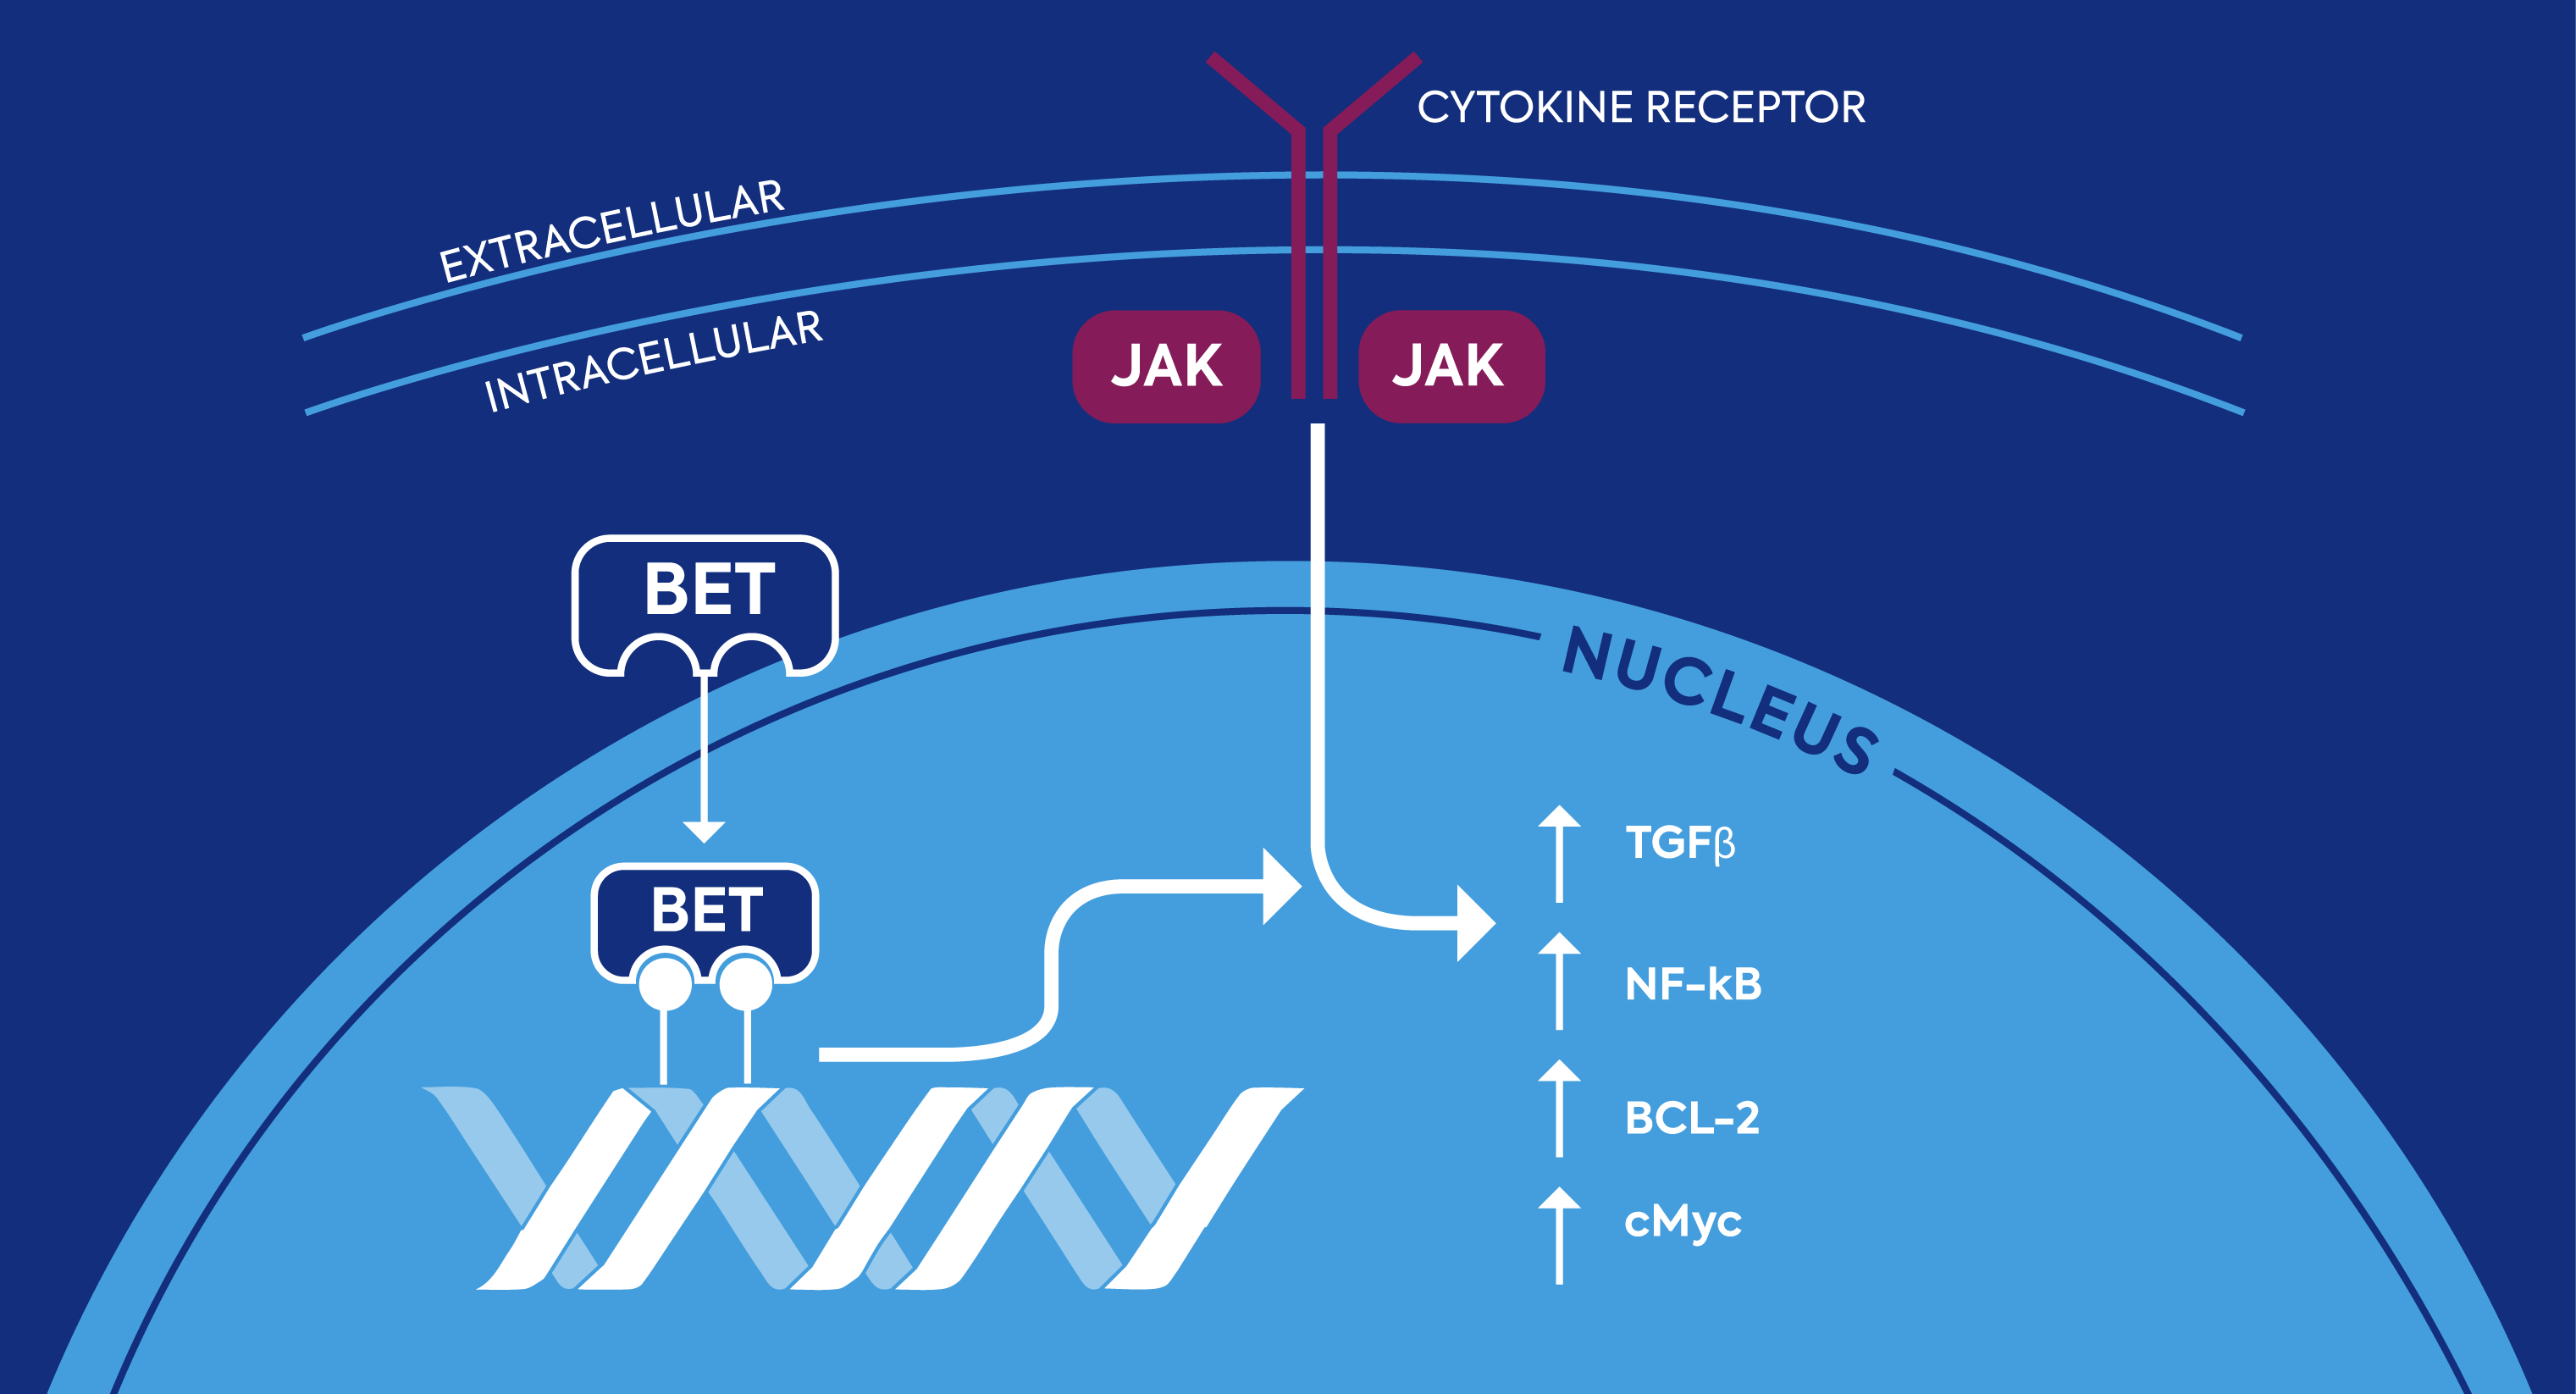 Illustrated diagram of intracellular pathways showing the pathophysiology of myelofibrosis fueled by both JAK- and BET-mediated pathways.